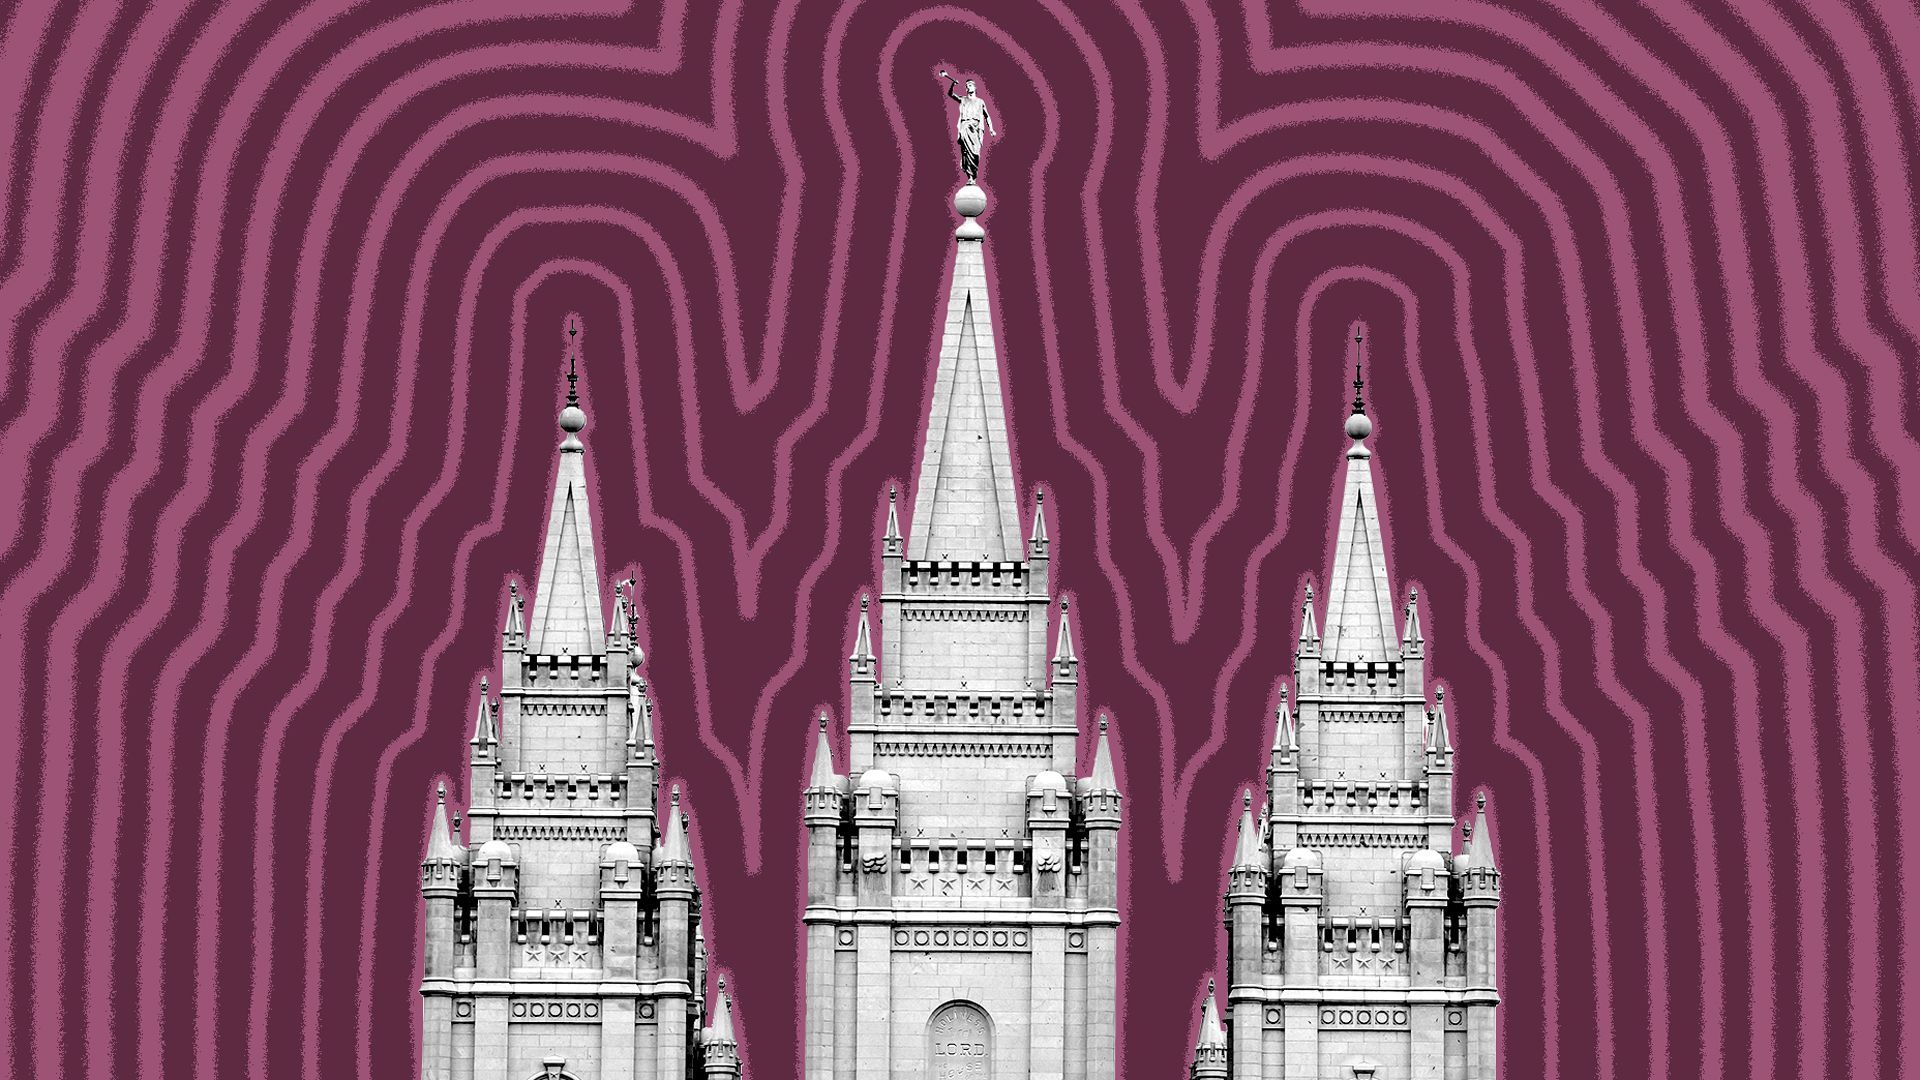 Illustration of the Salt Lake Temple with lines radiating from it.